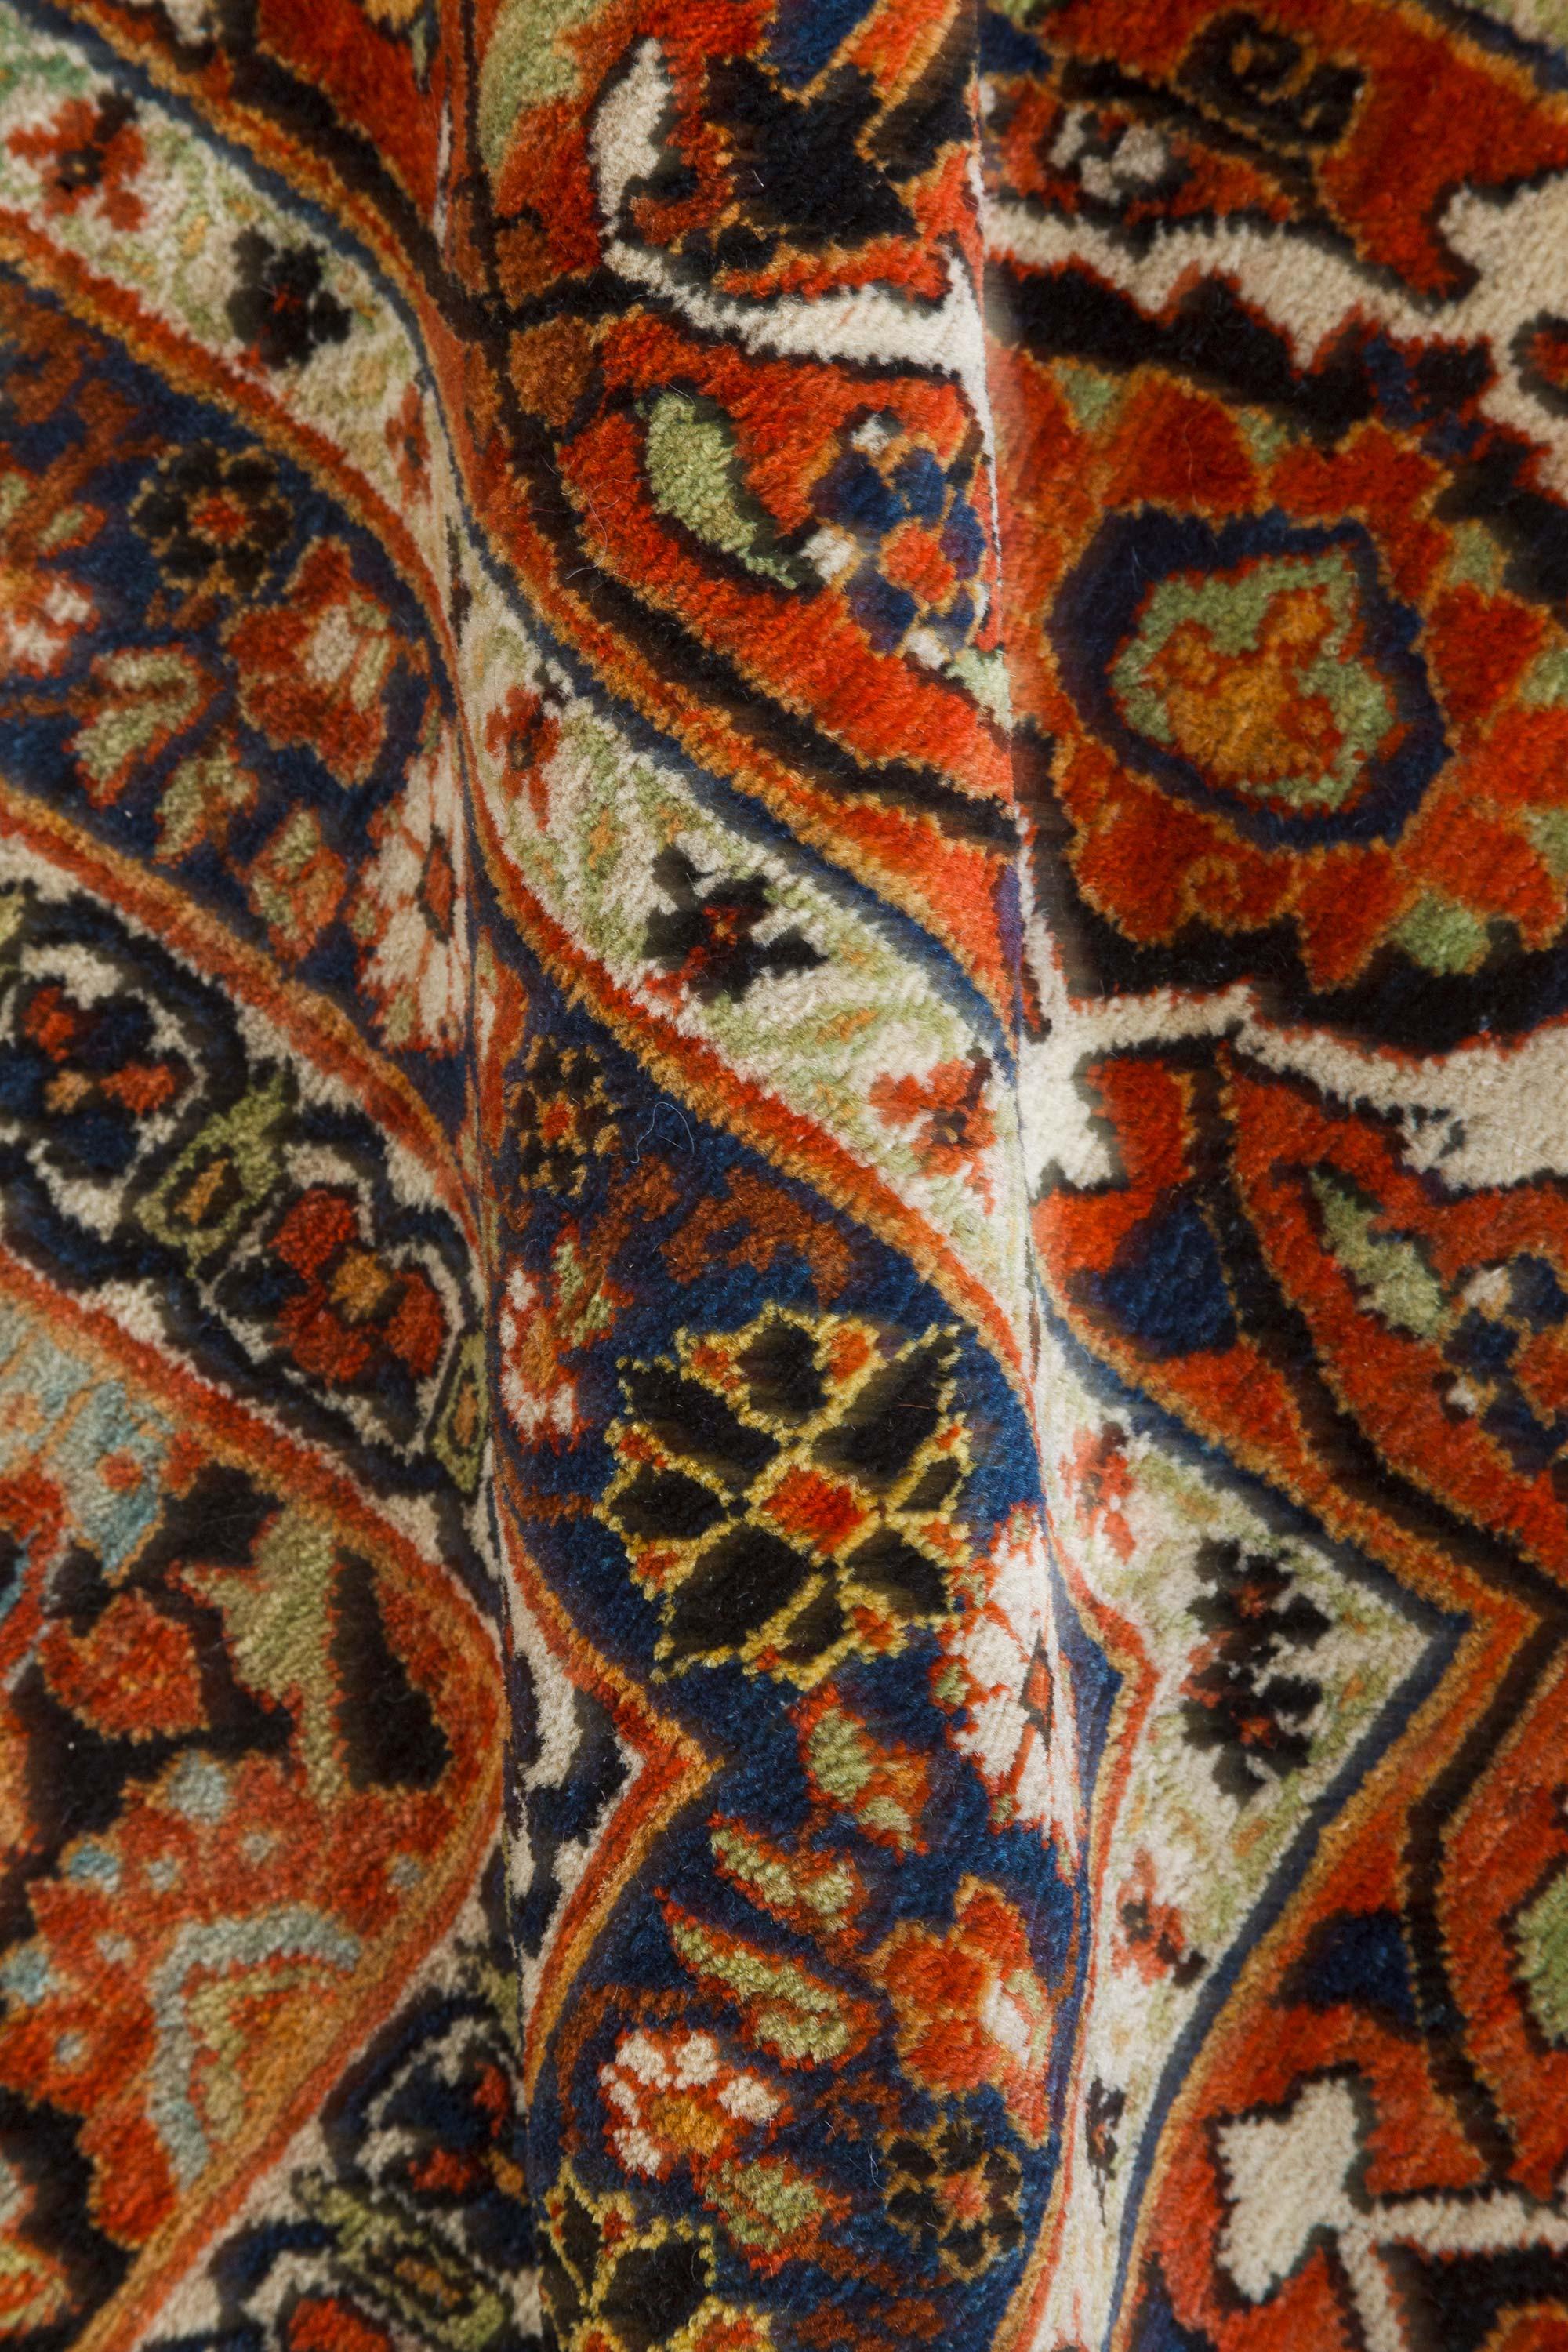 Early 20th century Persian Meshad rug
Size: 11'8